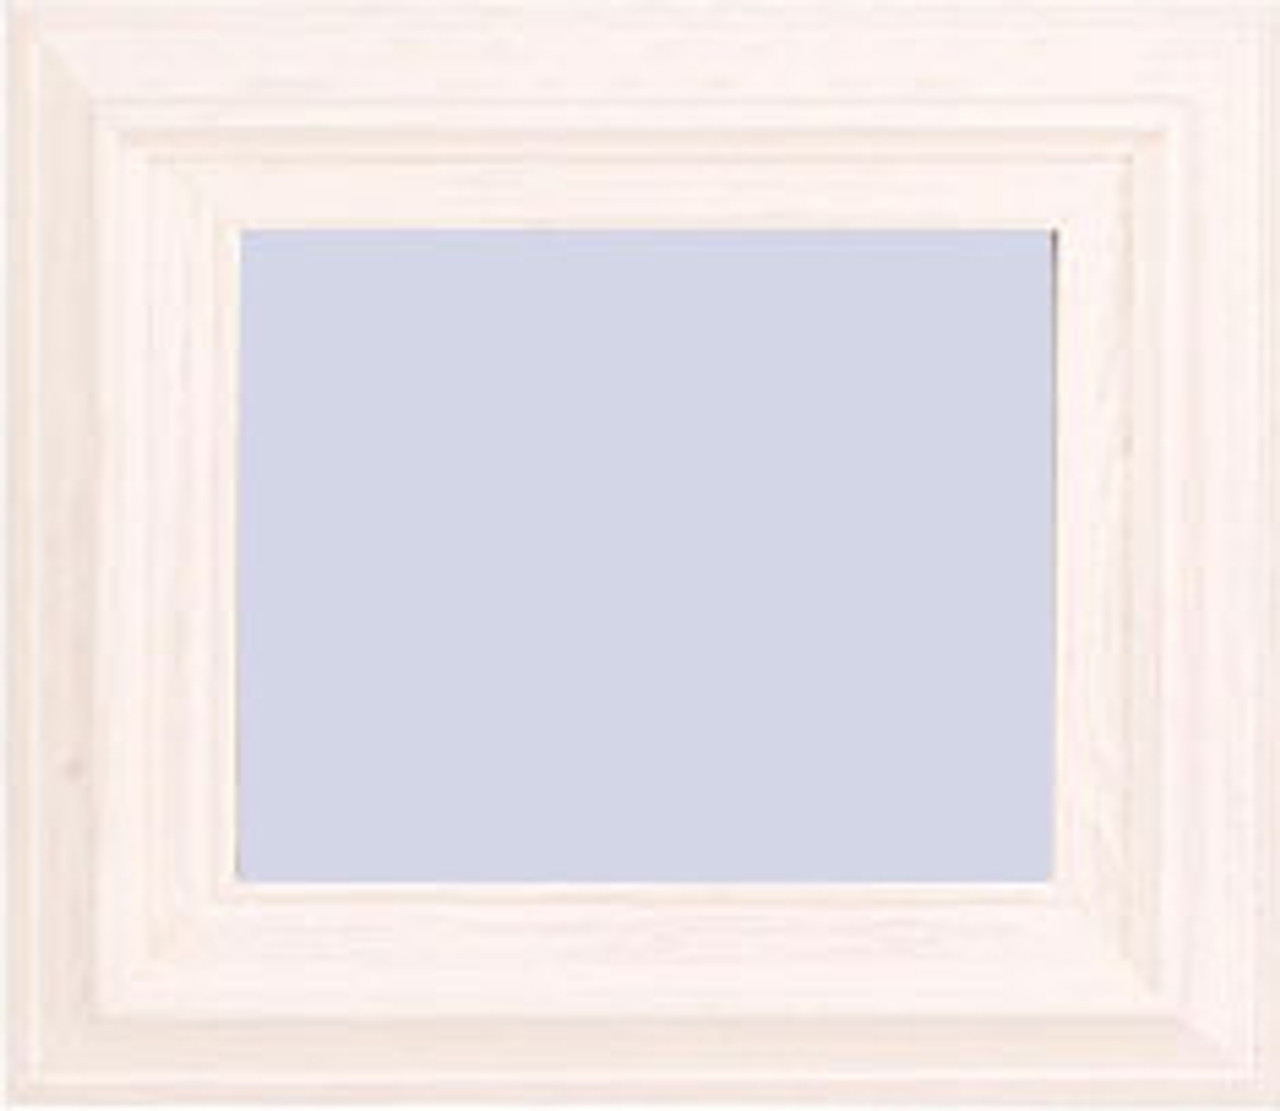 3 Inch Econo Wood Frames With Wood Liners: 20X28